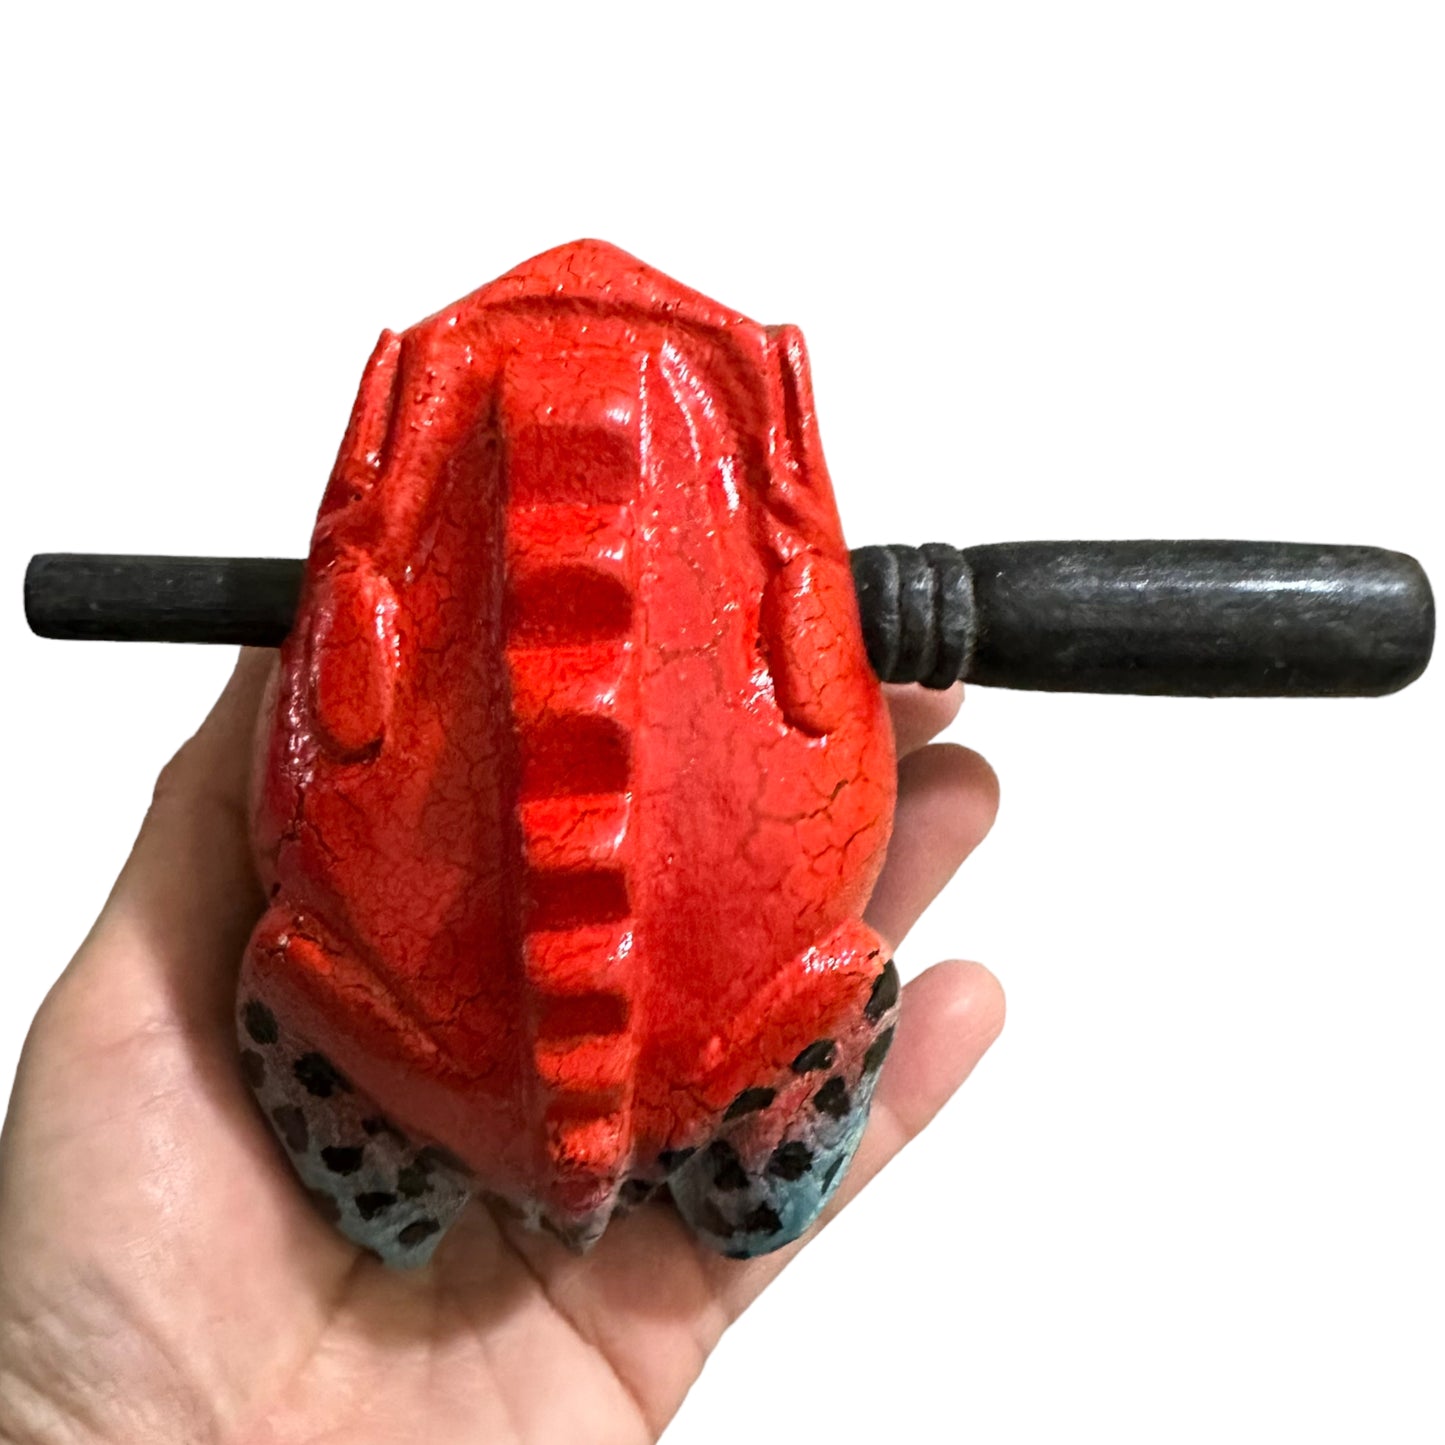 4" Large Red Dart Frog Musical Frog Percussion Instrument